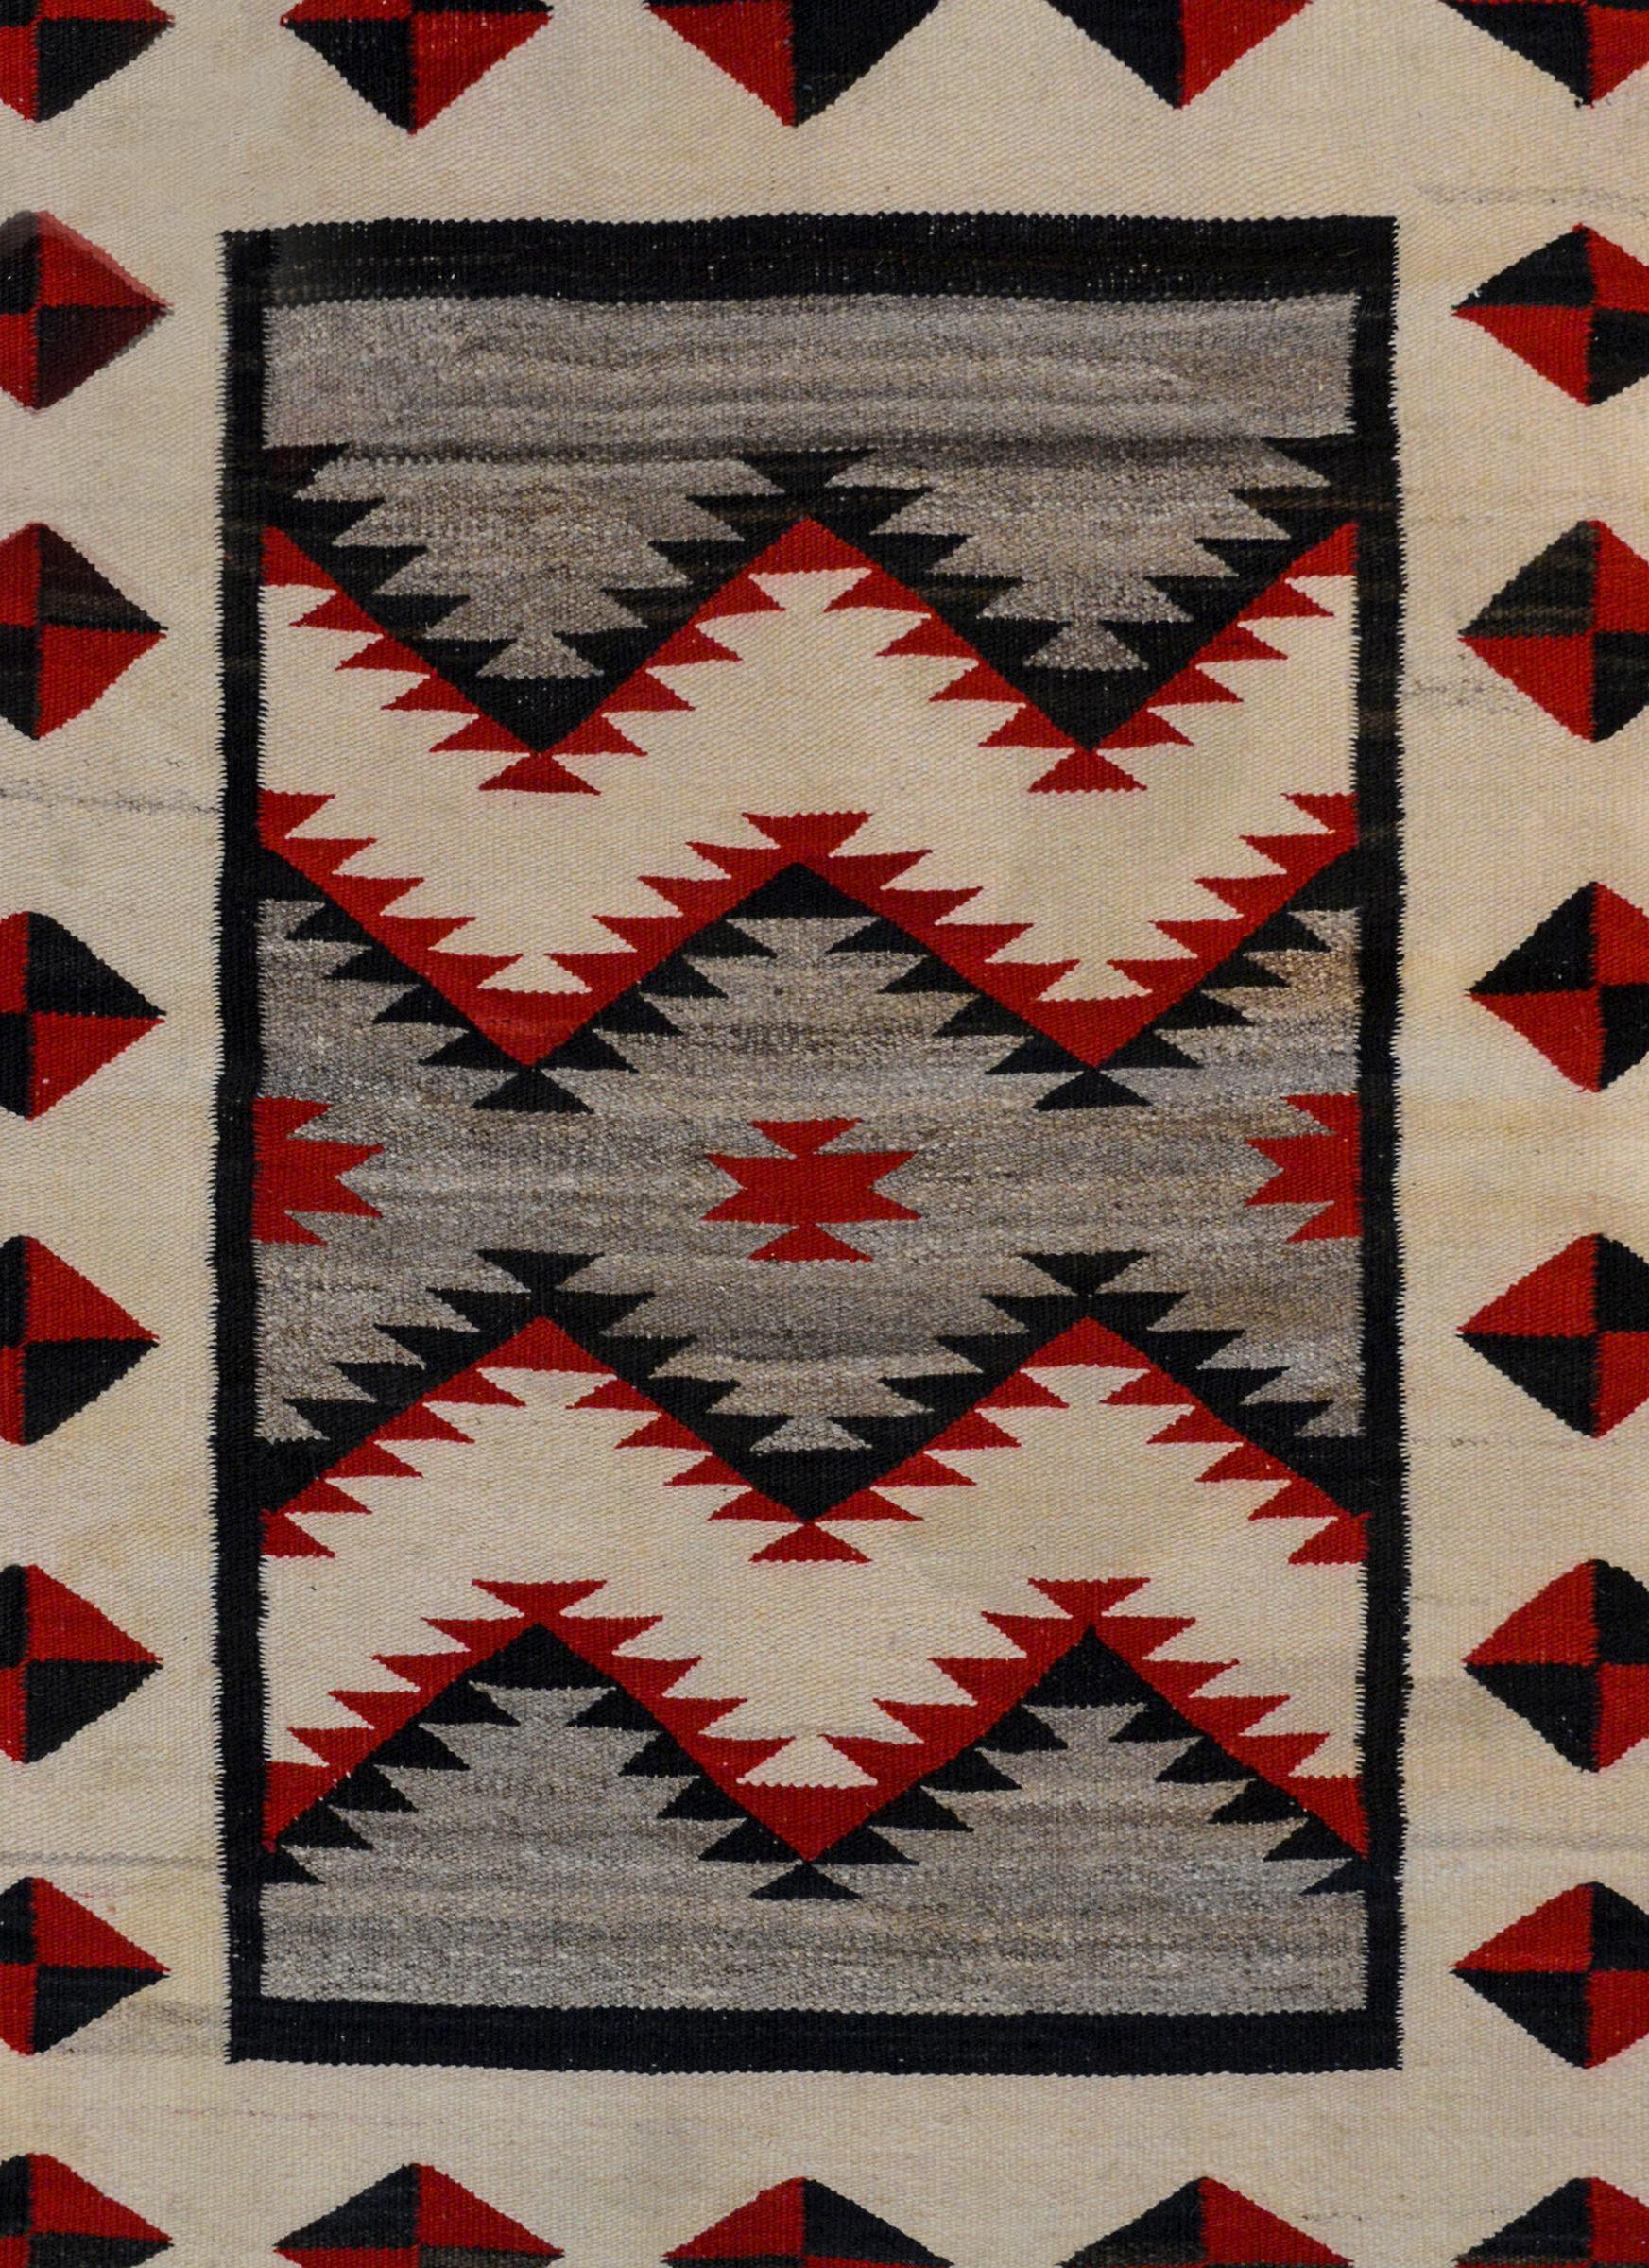 A gorgeous early 20th century Navajo rug with a fantastic pattern containing a zigzag pattern field woven in crimson, black and white wool on a gray background. The border is wonderful with a wide central white stripe with a repeated pattern of